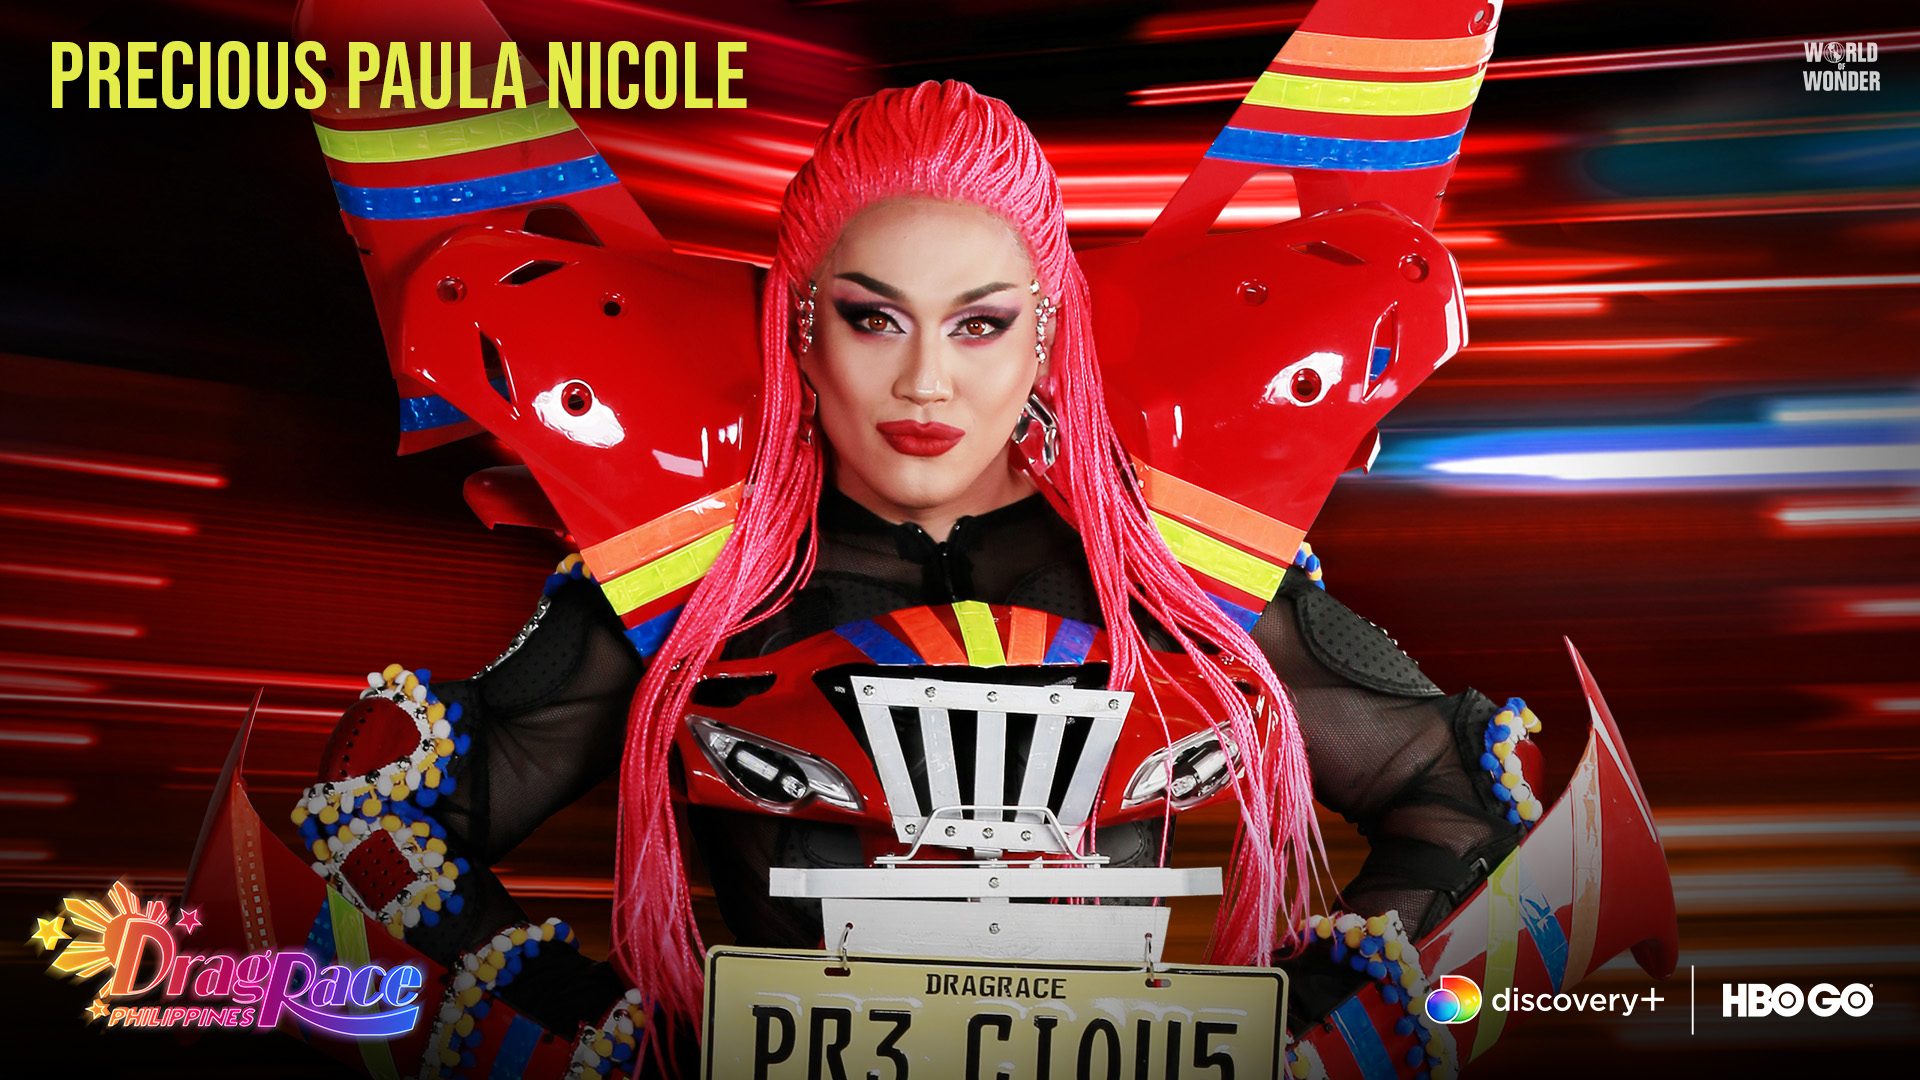 Precious Paula Nicole launches foundation, builds home for the Golden Gays